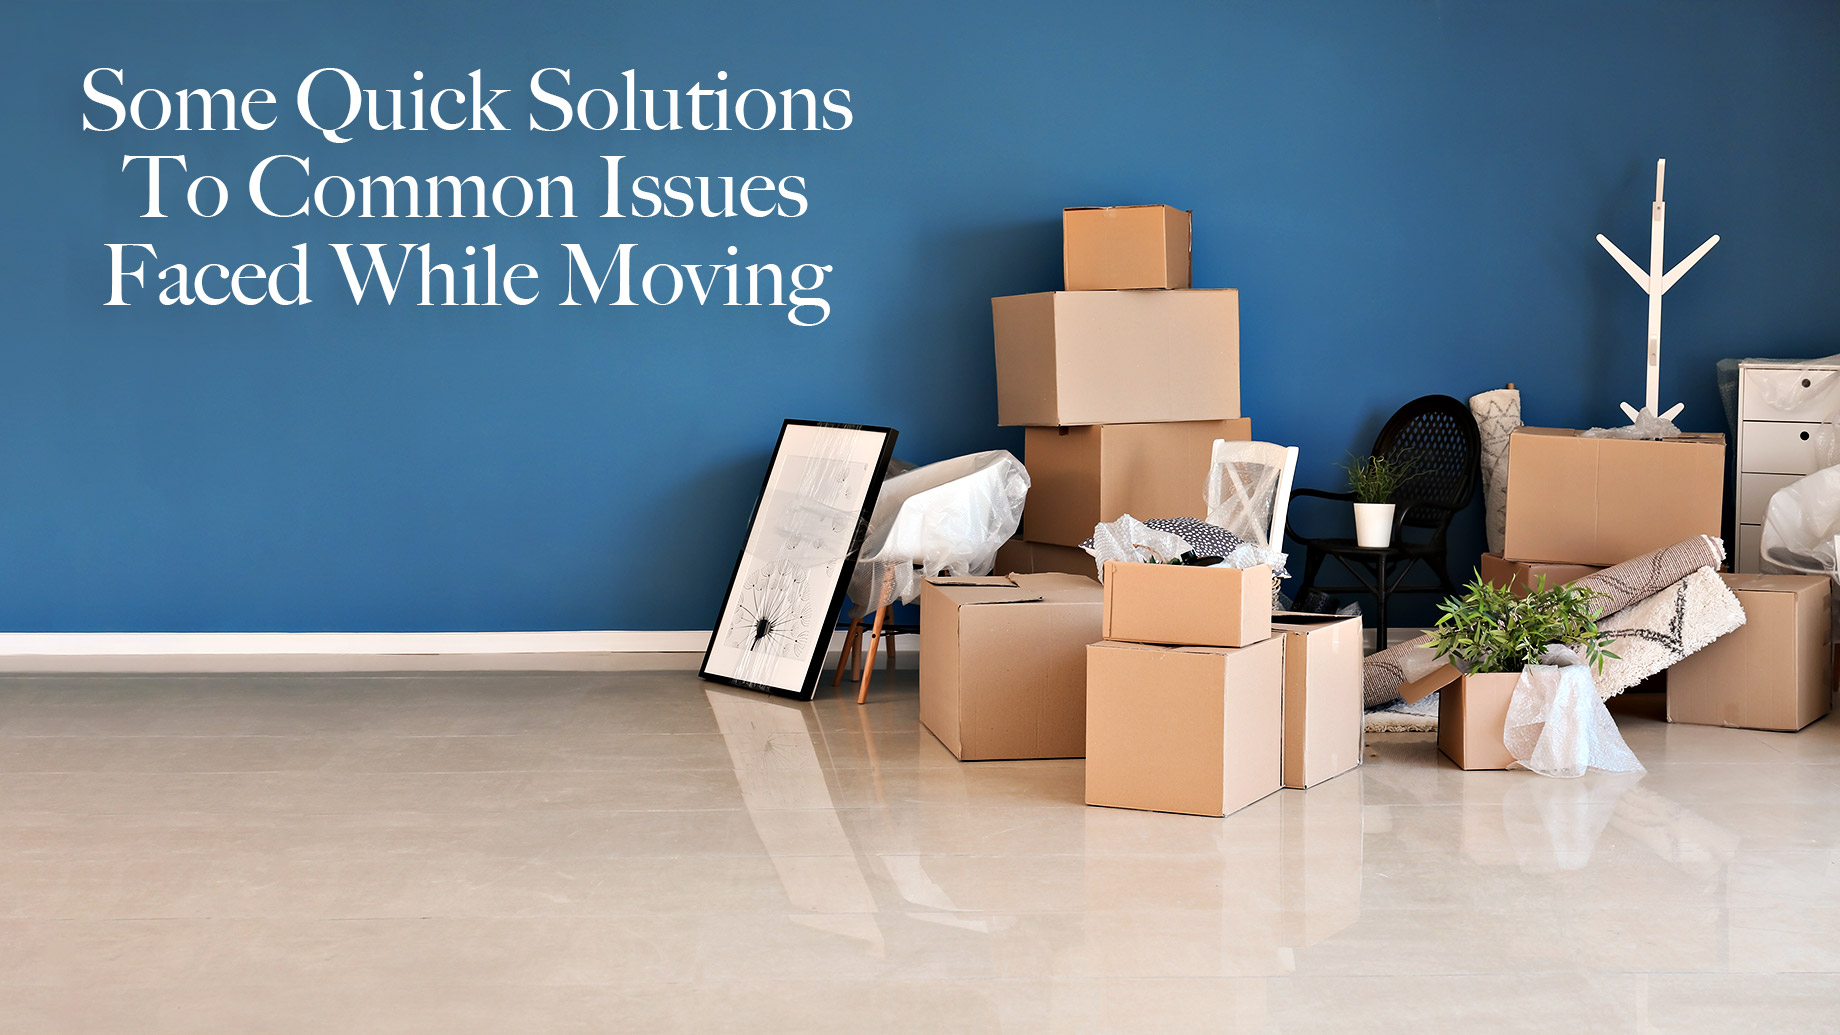 Some Quick Solutions To Common Issues Faced While Moving